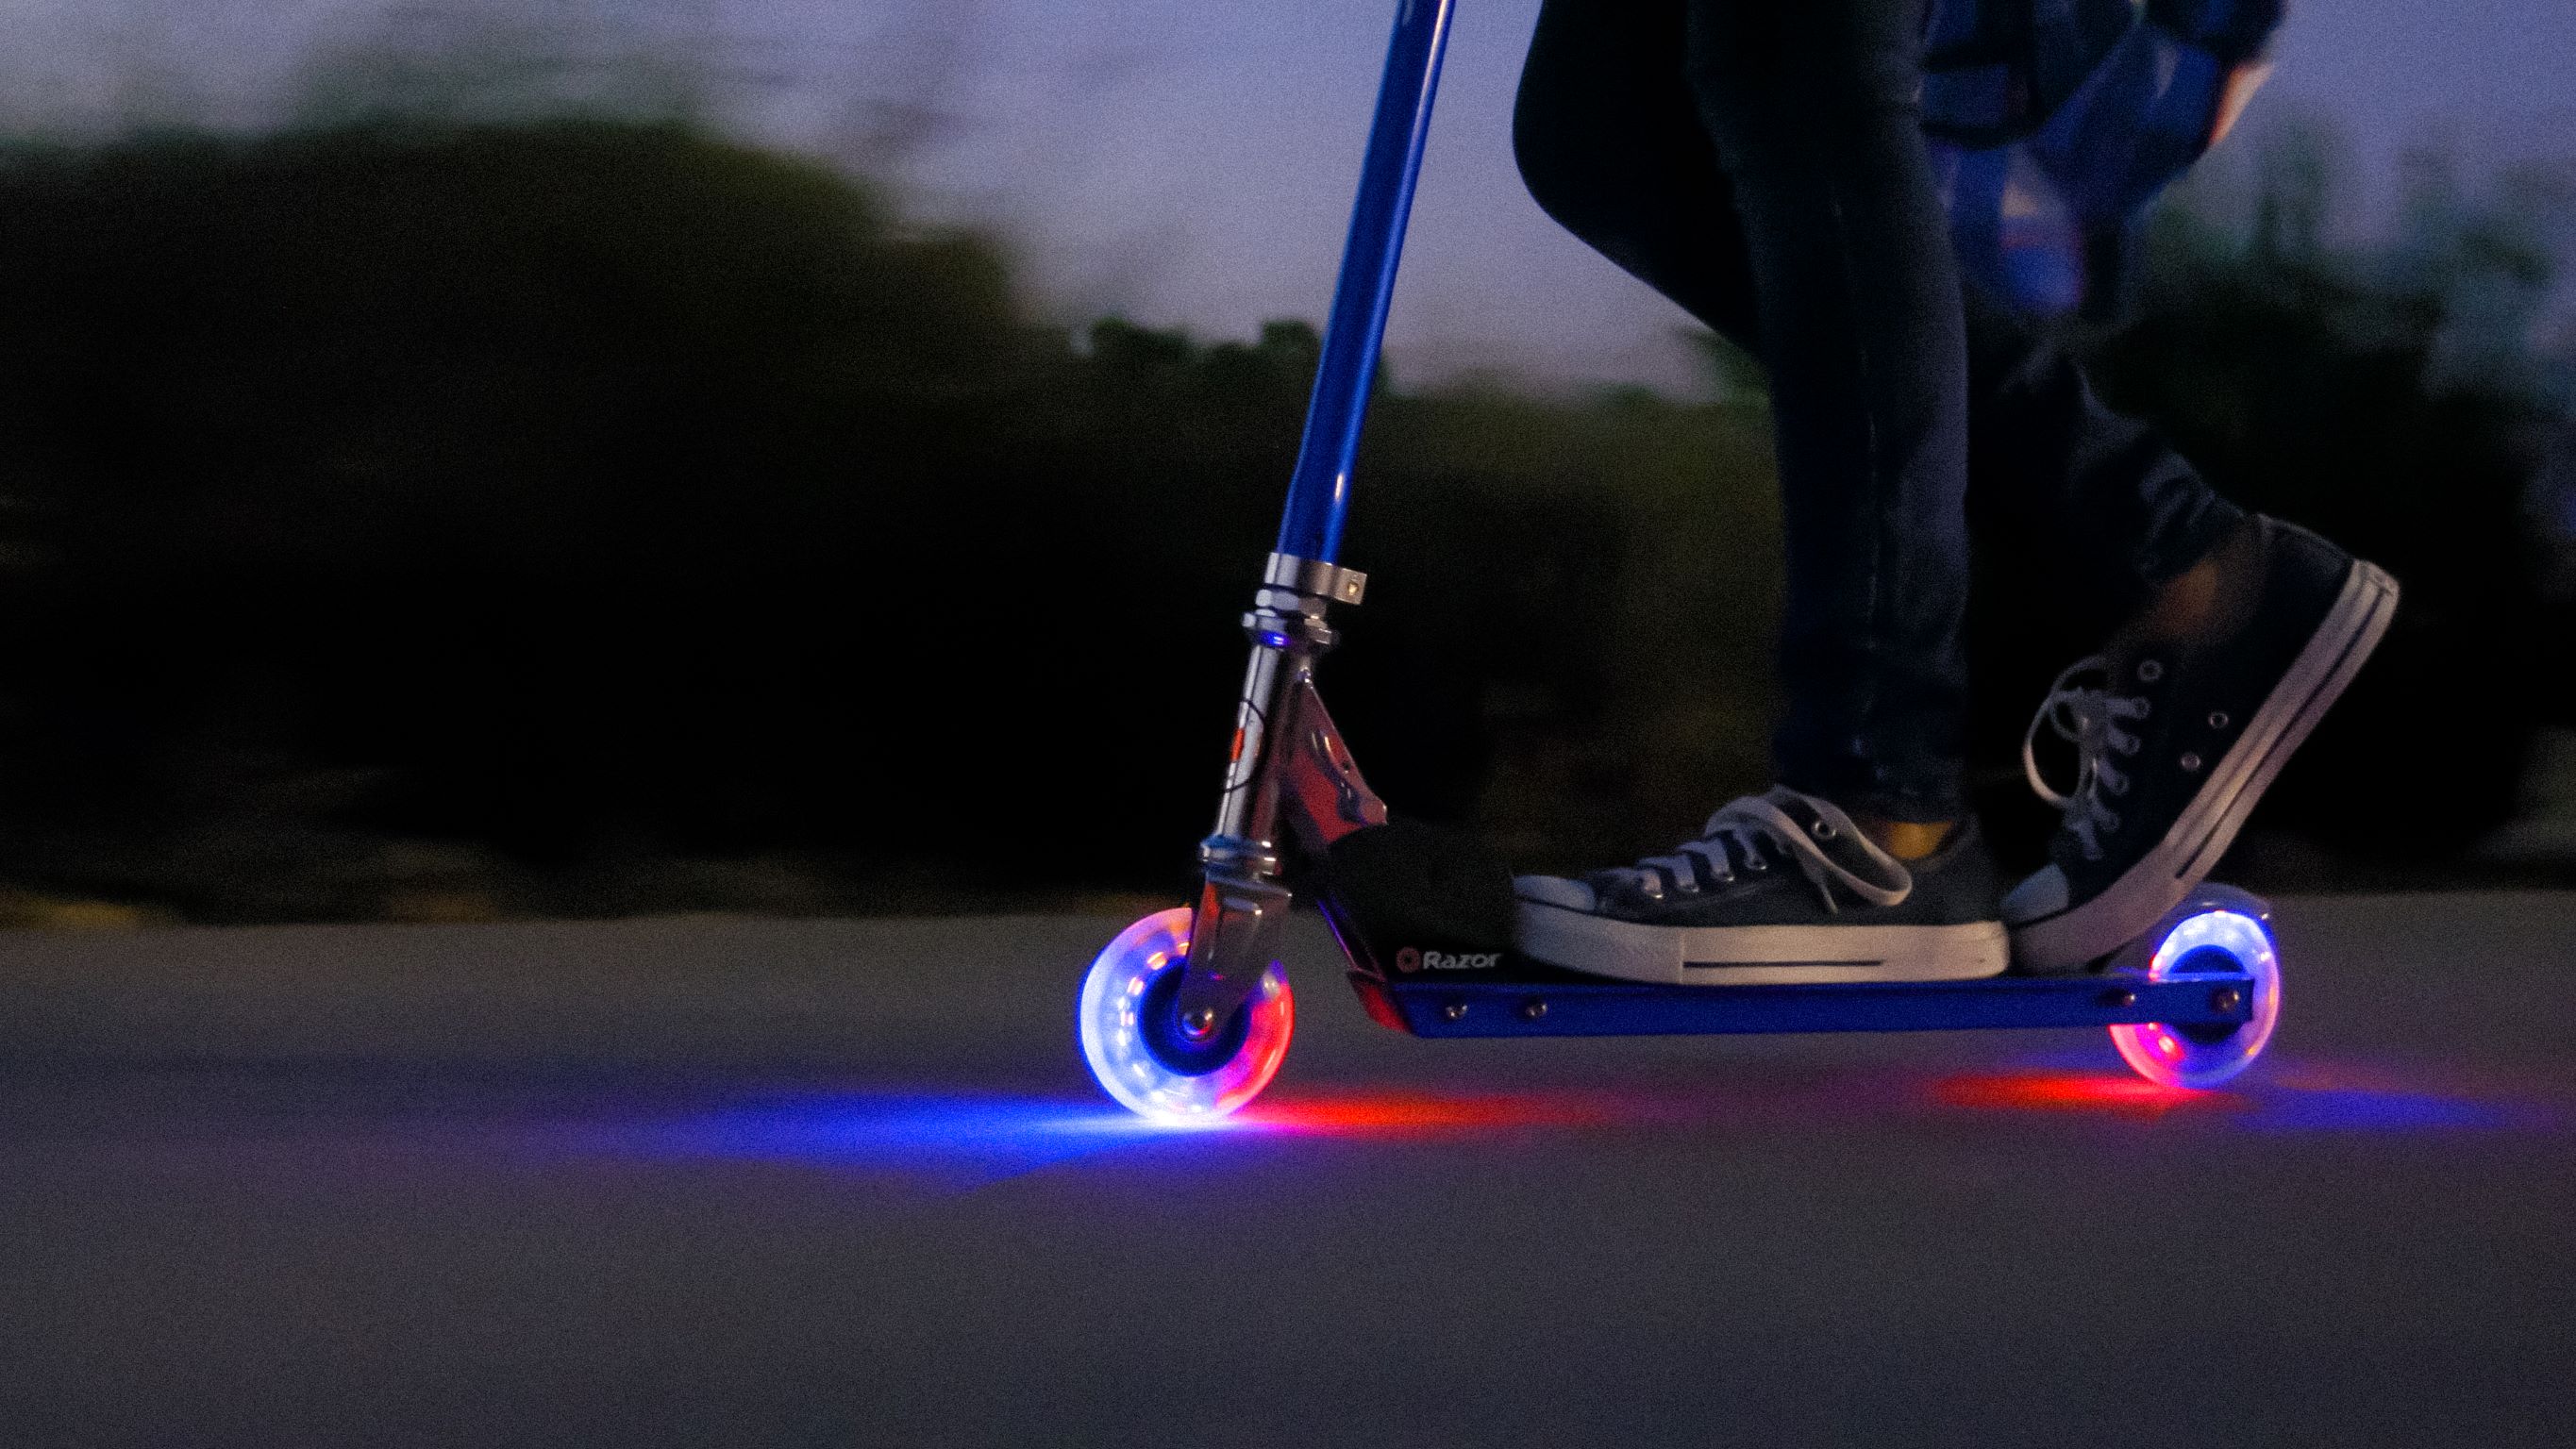 Razor S Folding Kick Scooter with Light-Up Wheel - Blue, for Kids Ages 5+ and up to 110 lbs - image 3 of 10